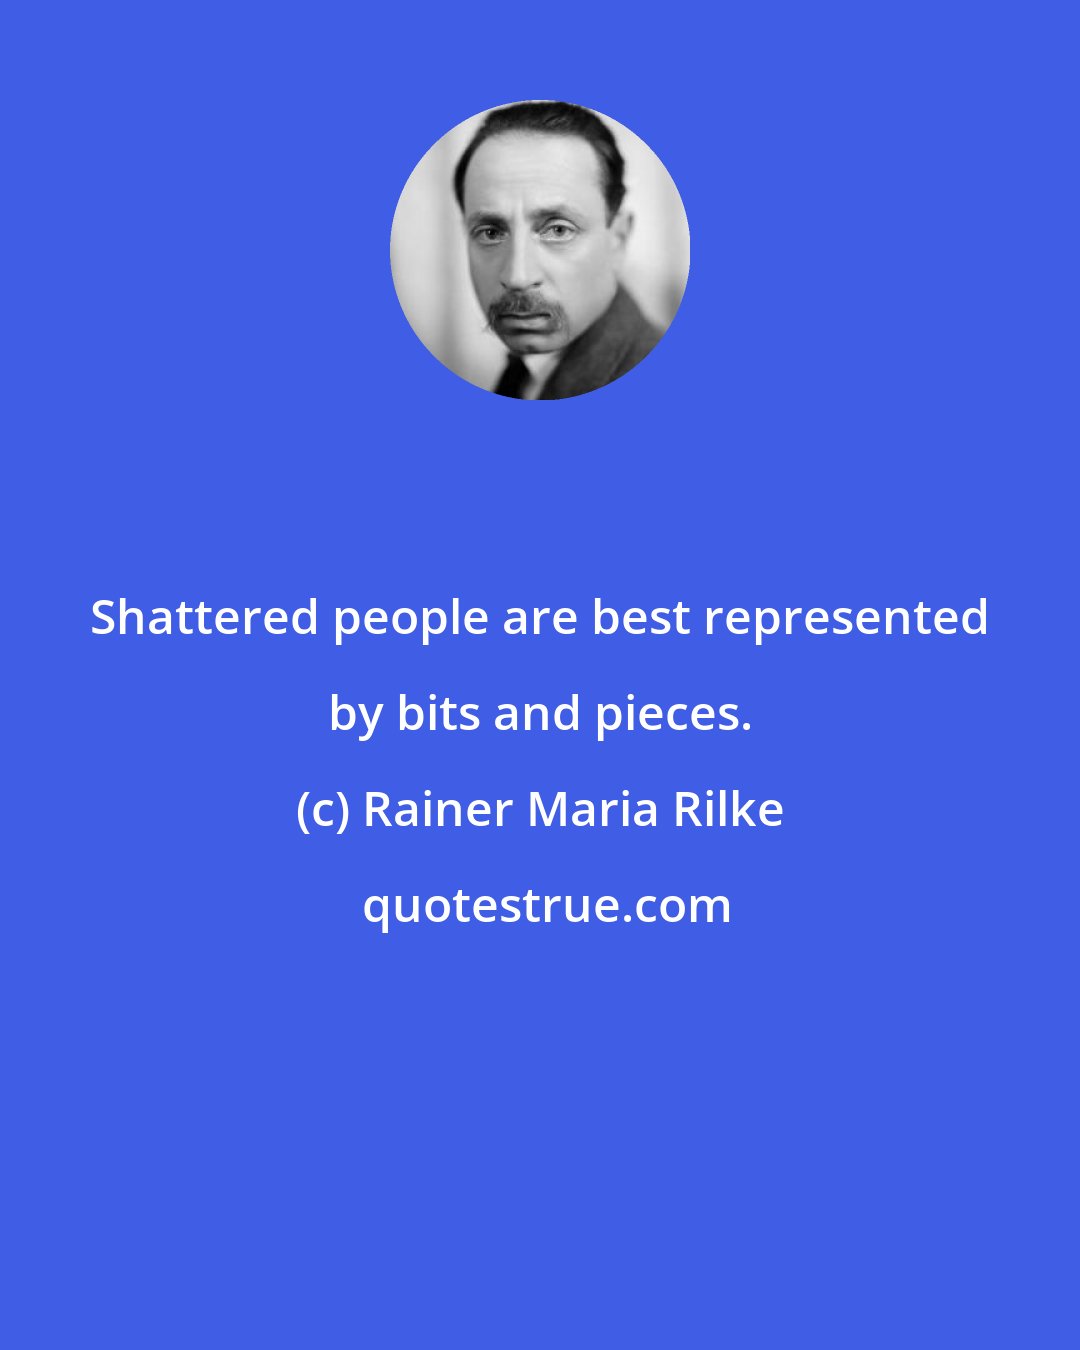 Rainer Maria Rilke: Shattered people are best represented by bits and pieces.